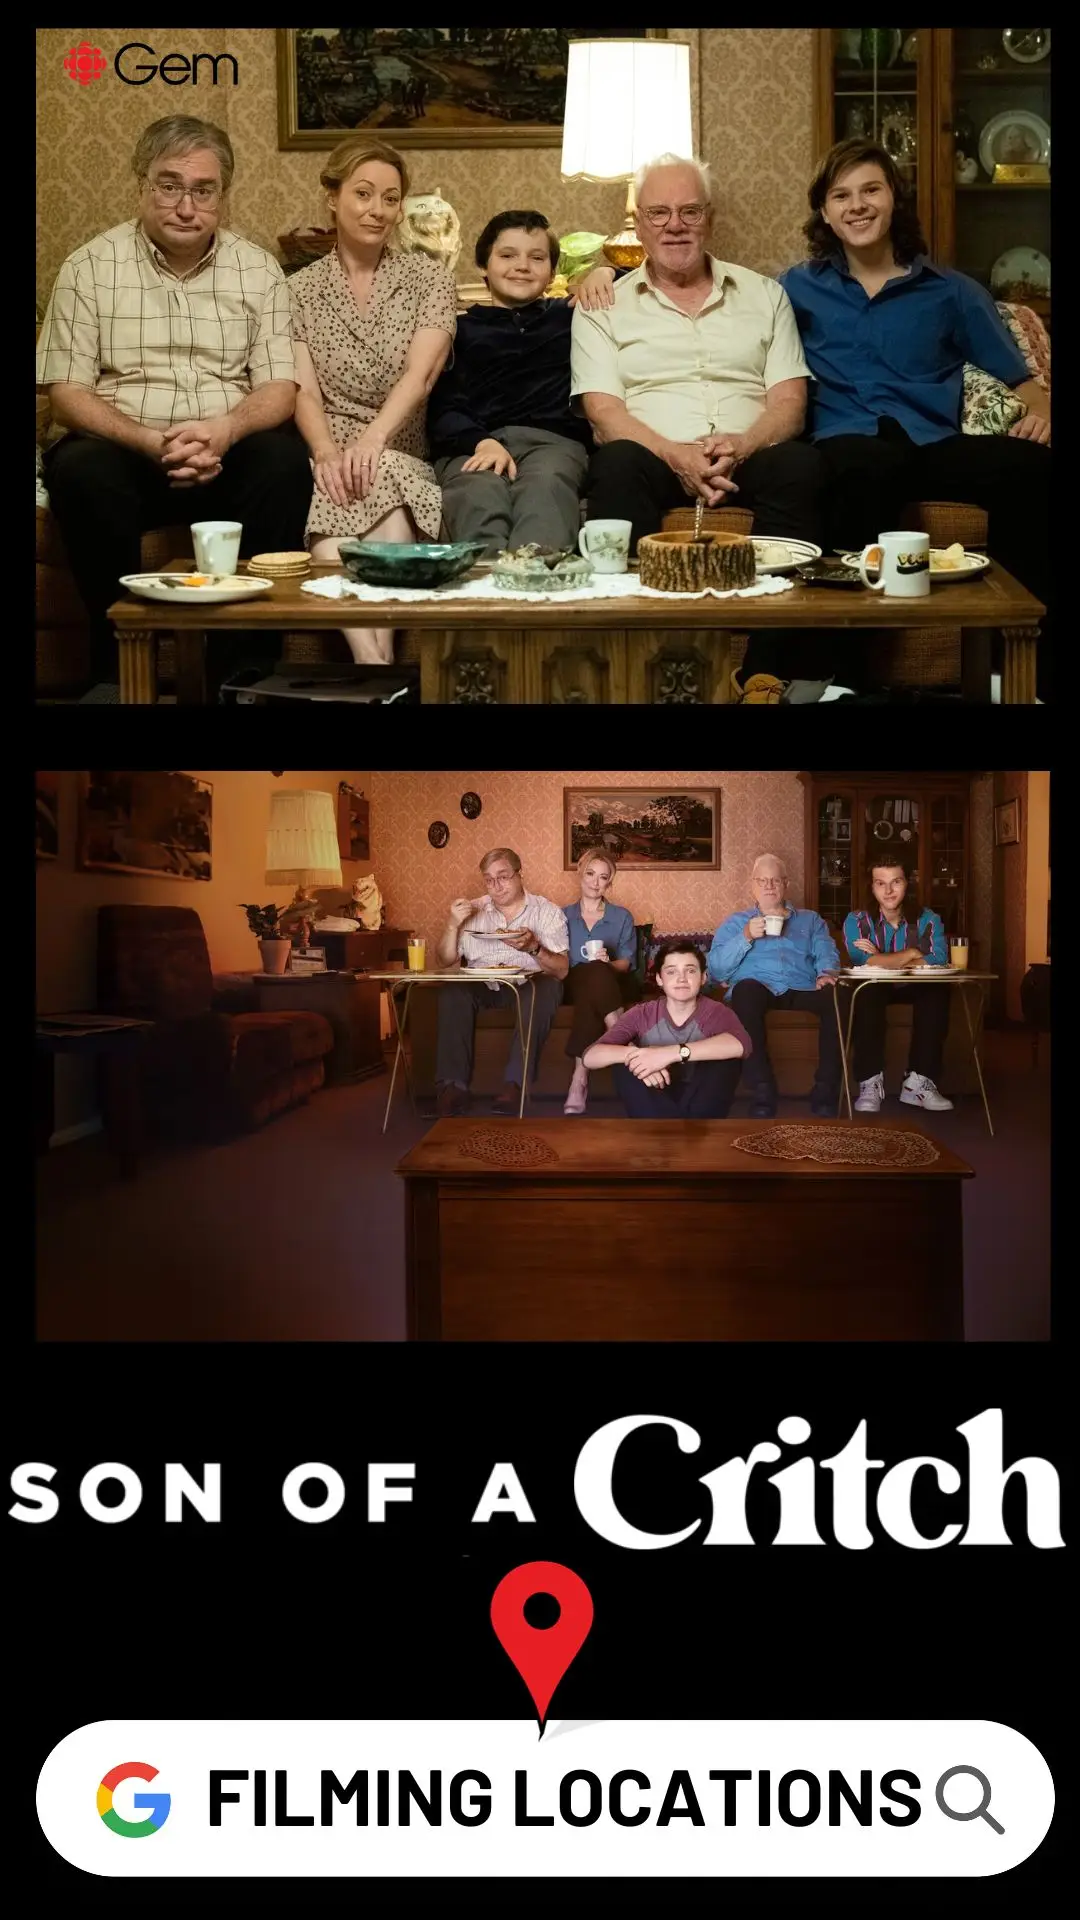 Son of a Critch Season 3 Filming Locations